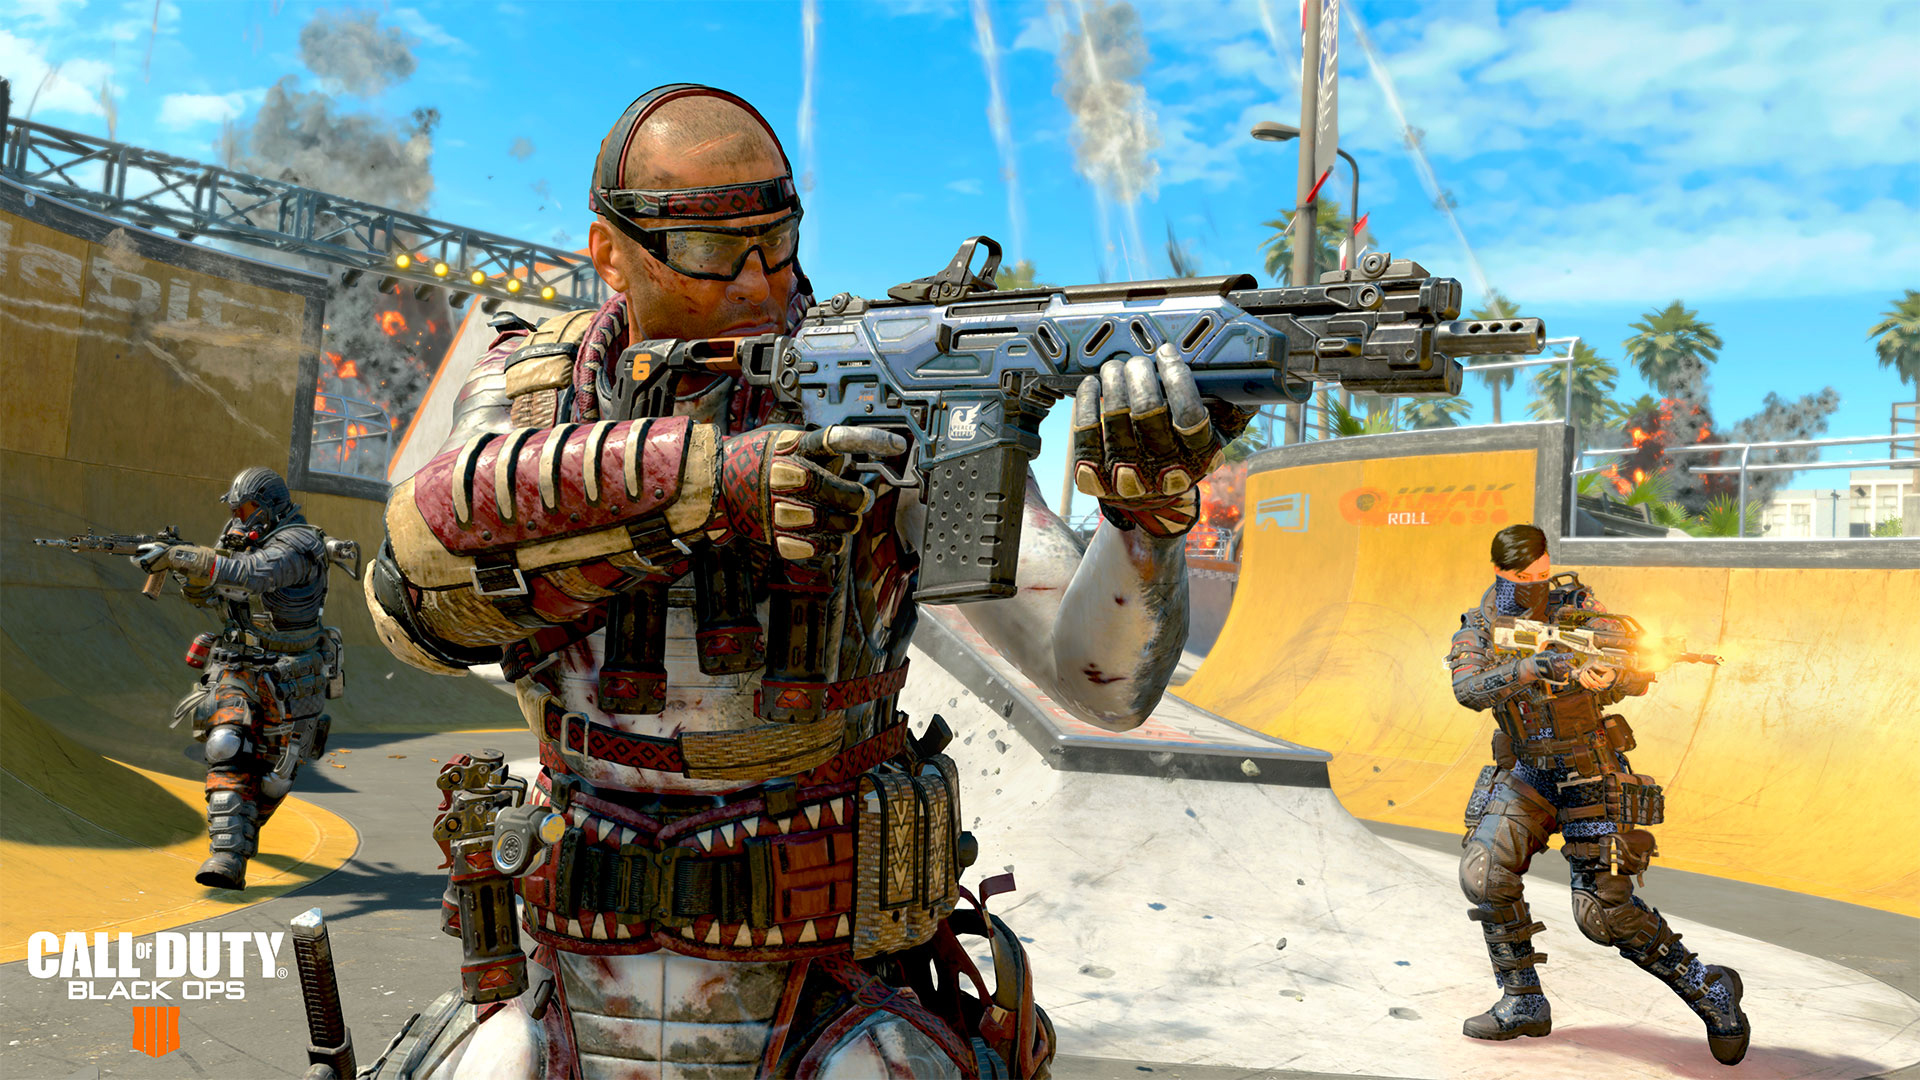 Map Spotlight Guidance on Grind in Call of Duty® Black Ops 4